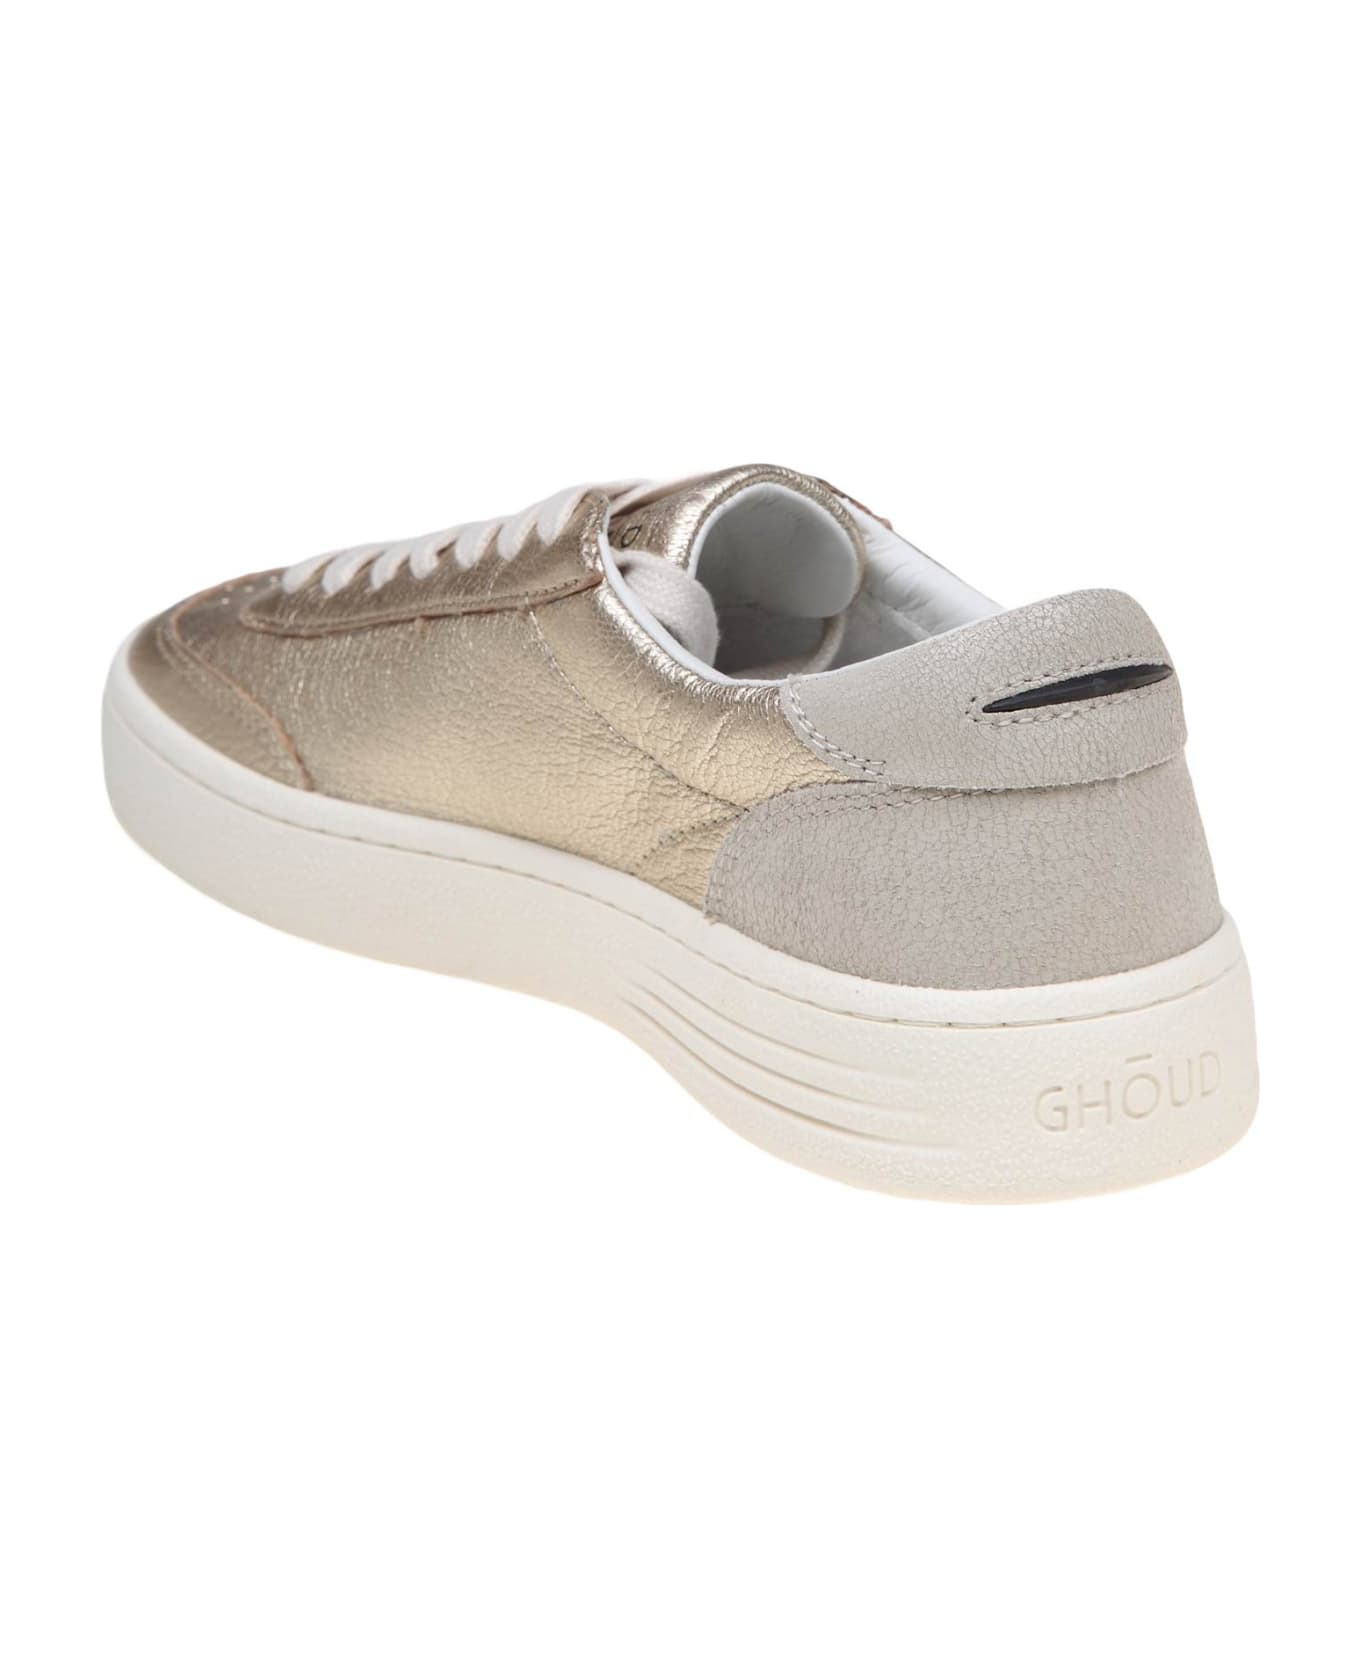 GHOUD Lido Low Sneakers In Platinum Color Leather - CRACKLE/MIRROR PLAT